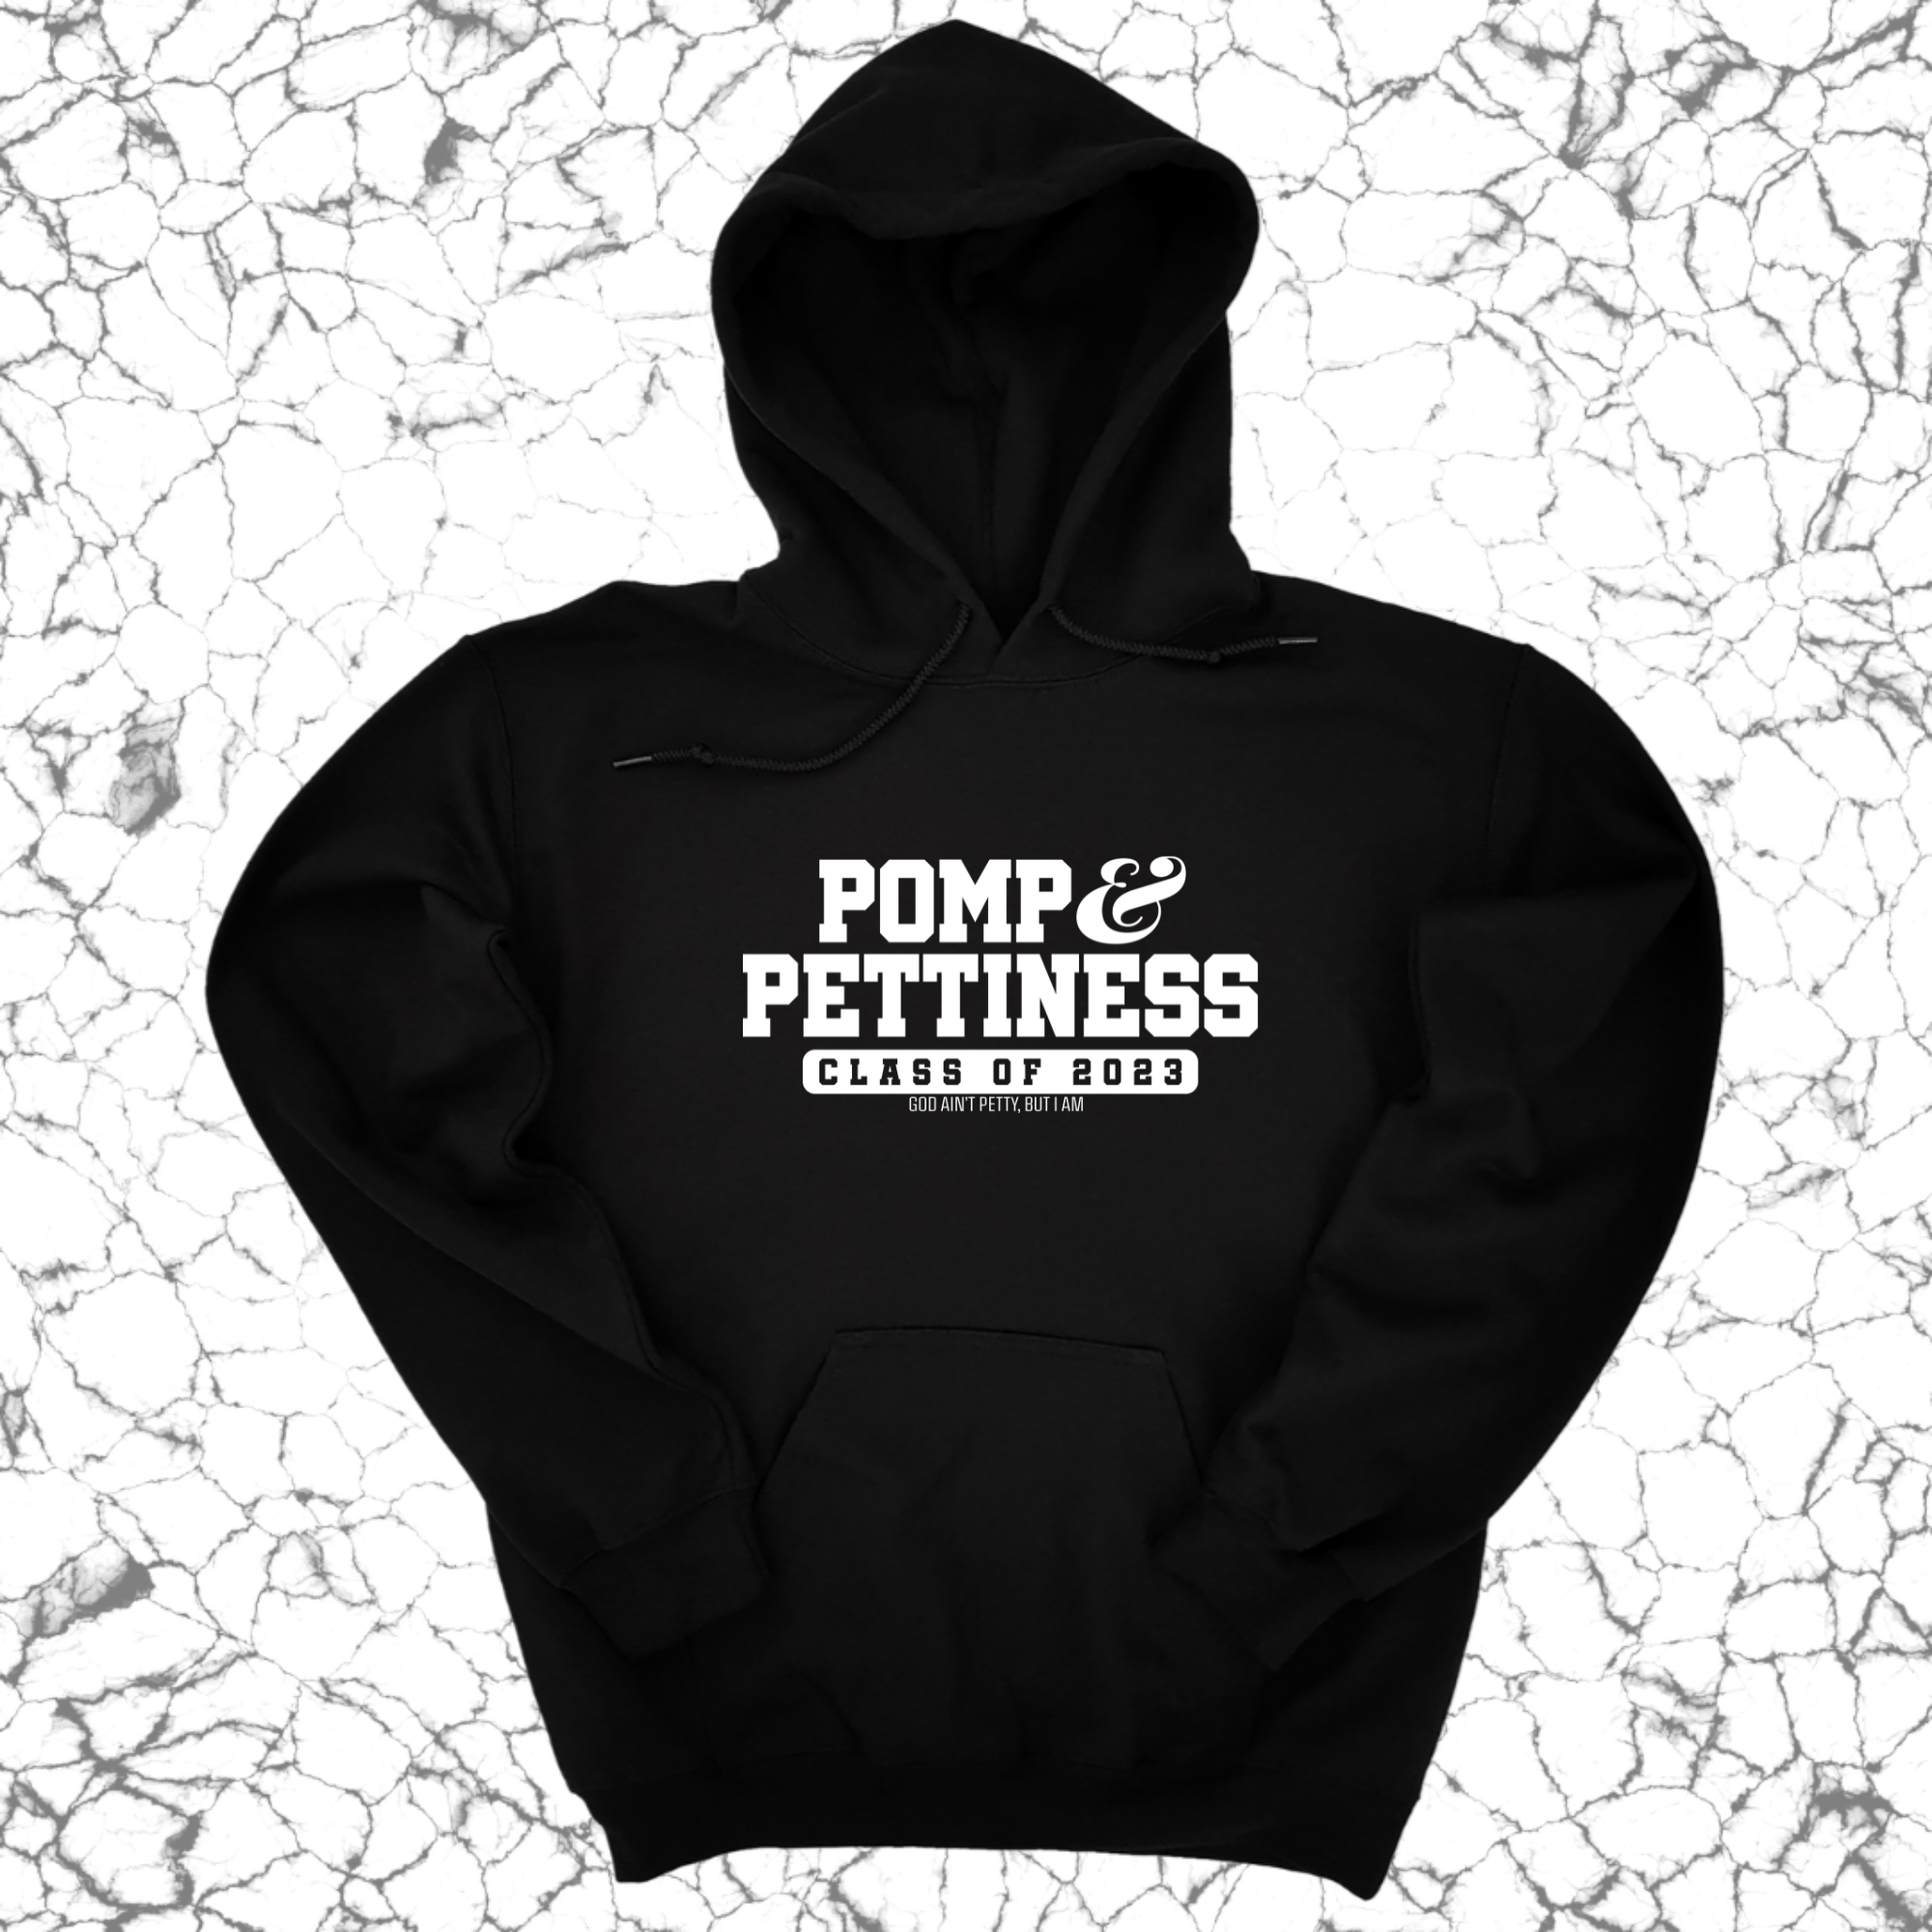 Pomp & Pettiness (Class of 2023) Unisex Hoodie-Hoodie-The Original God Ain't Petty But I Am